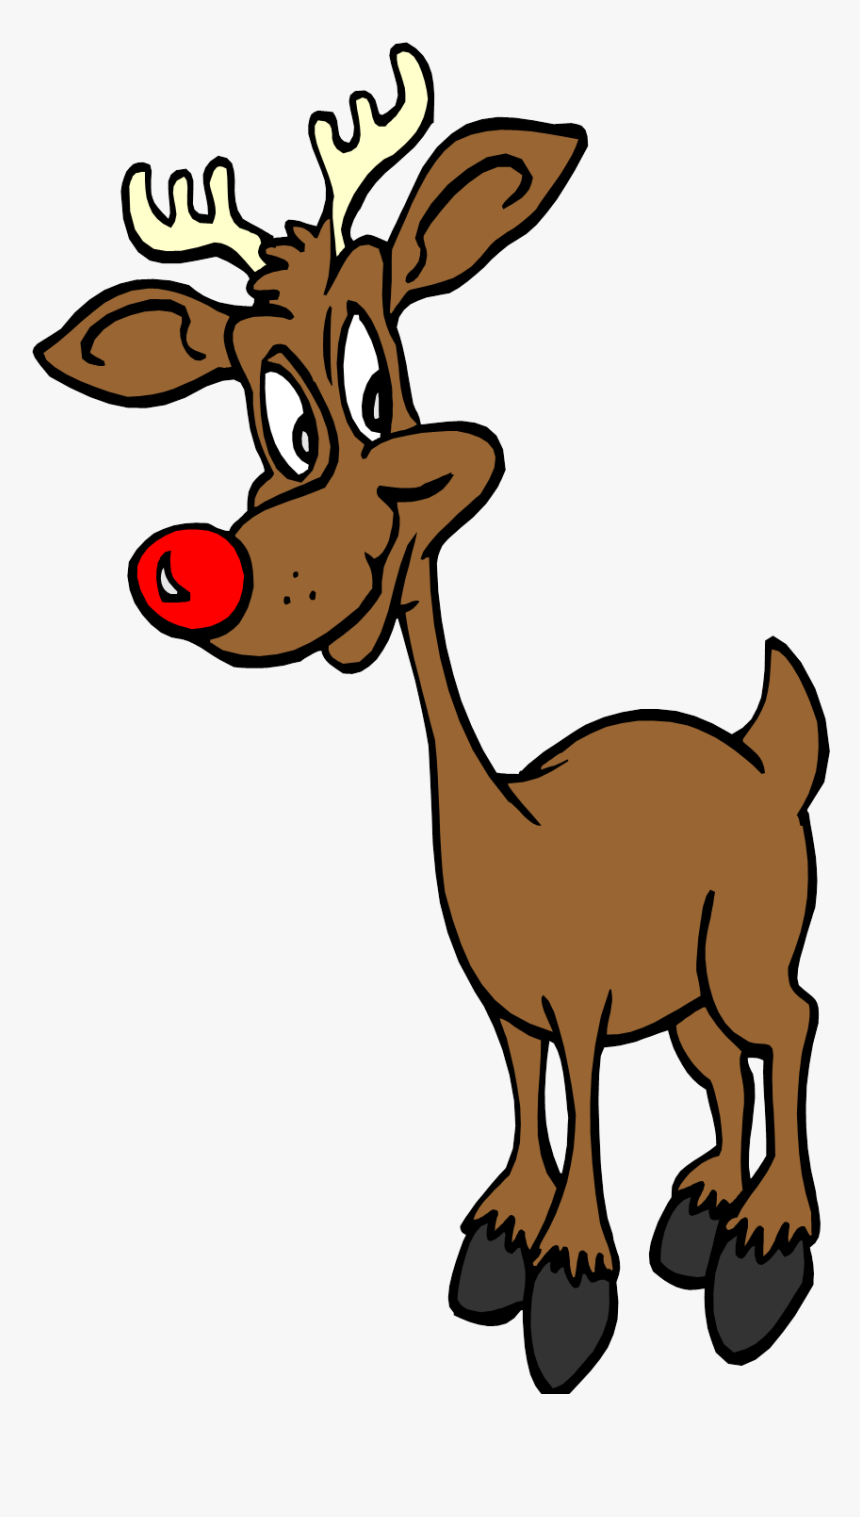 Rudolph The Red-nosed Reindeer - Rudolph The Red Nosed Reindeer Graphic, HD Png Download, Free Download